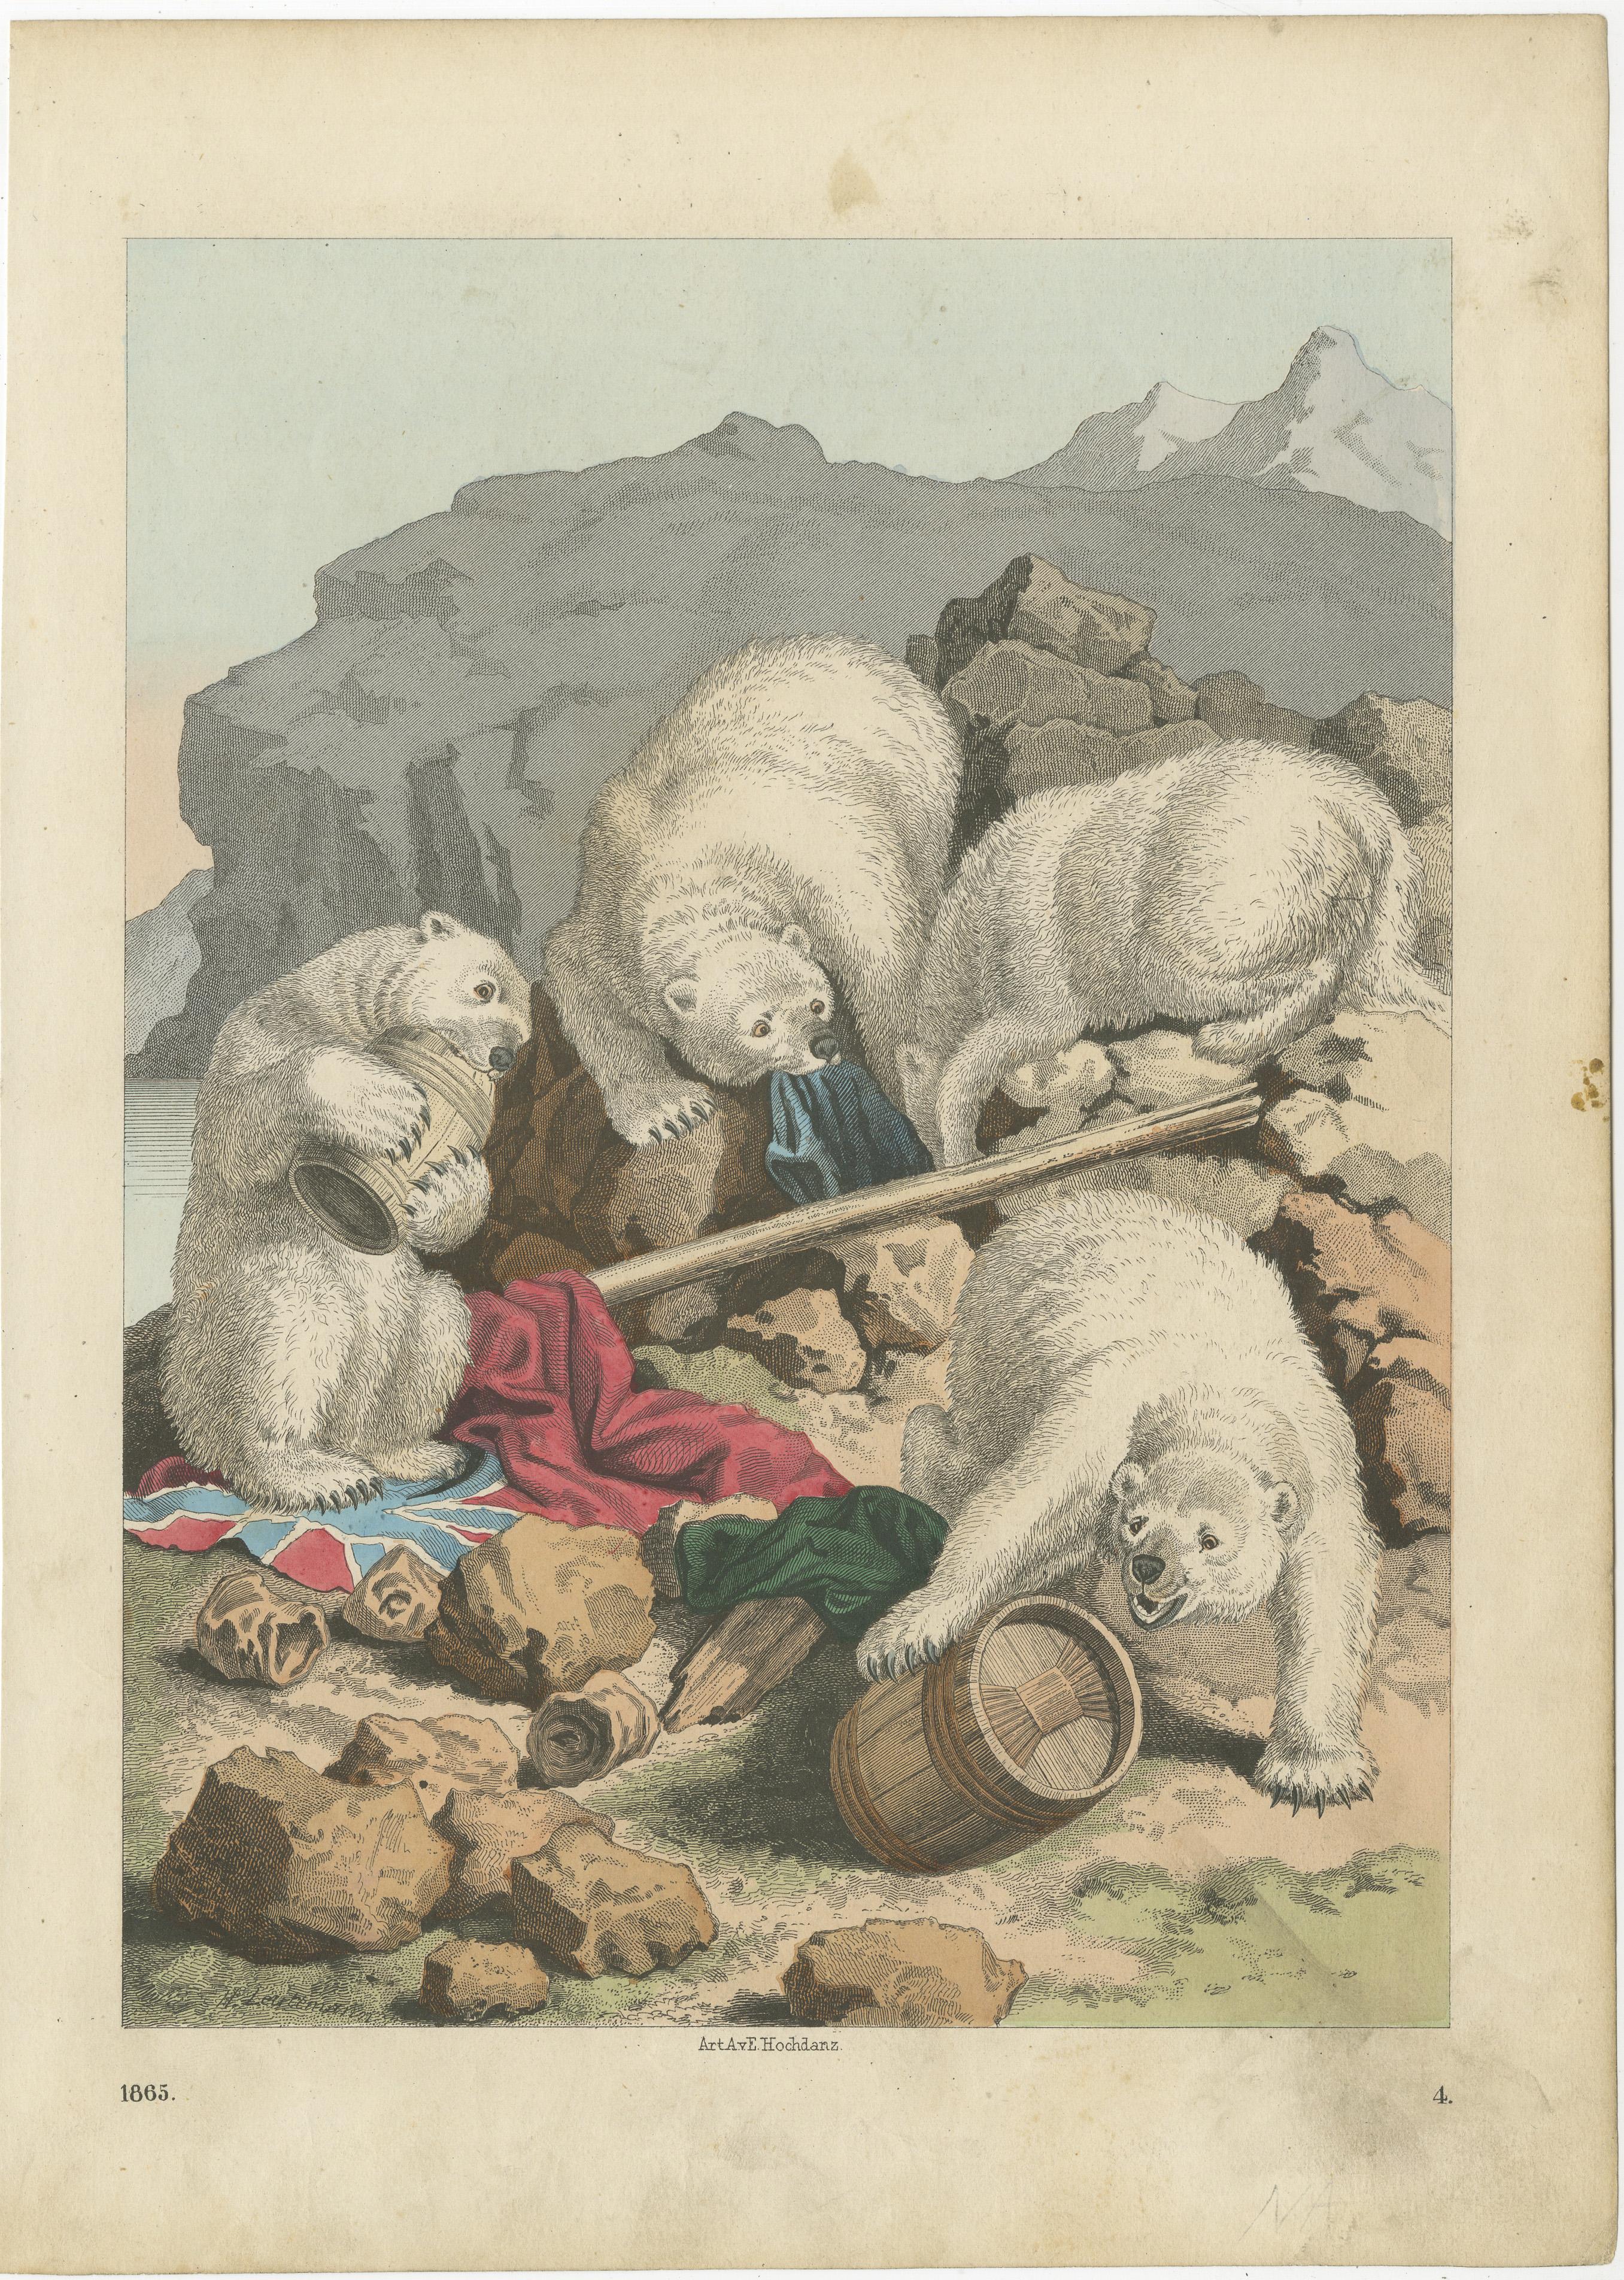 Original old print of polar bears. Lithograped by or after Hochdanz. Published circa 1865.